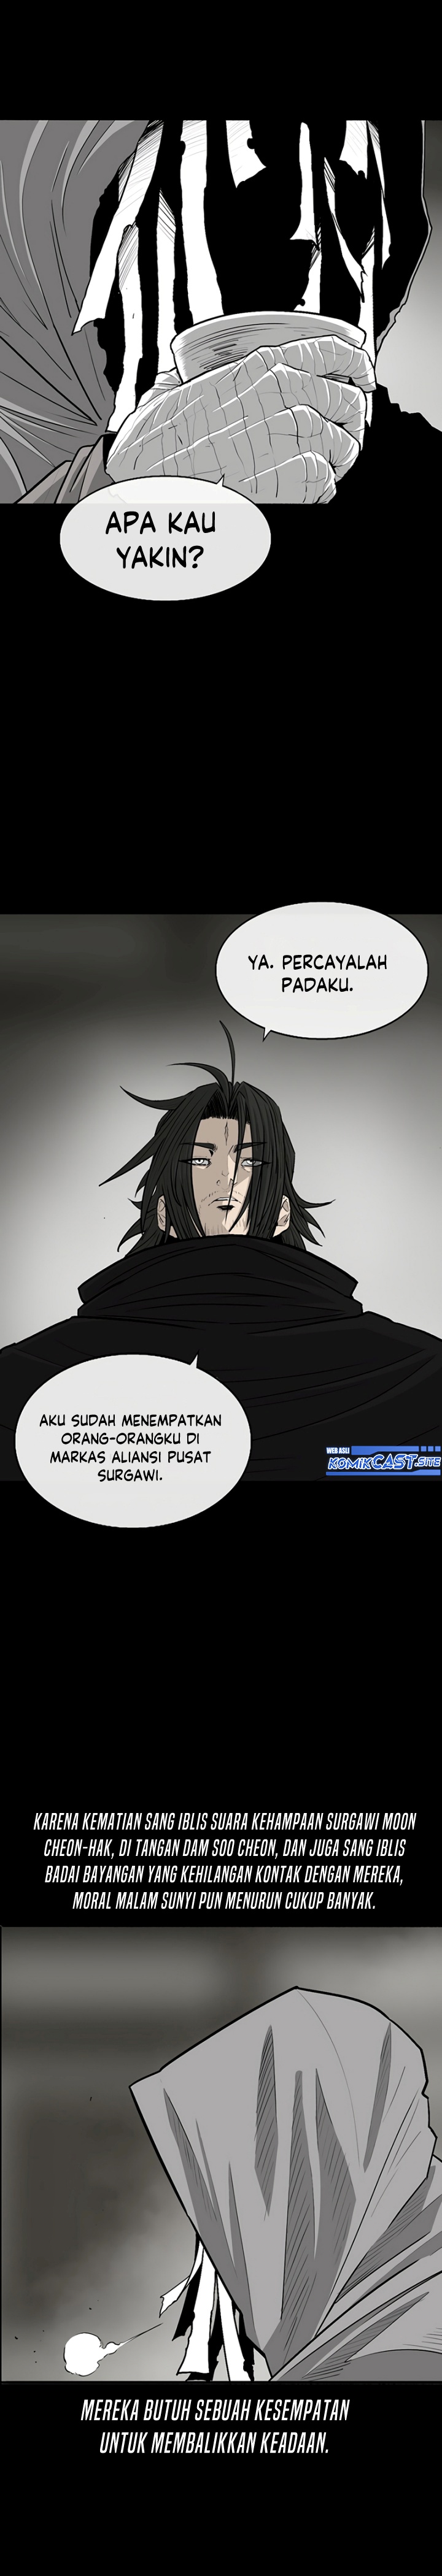 Legend Of The Northern Blade Chapter 159